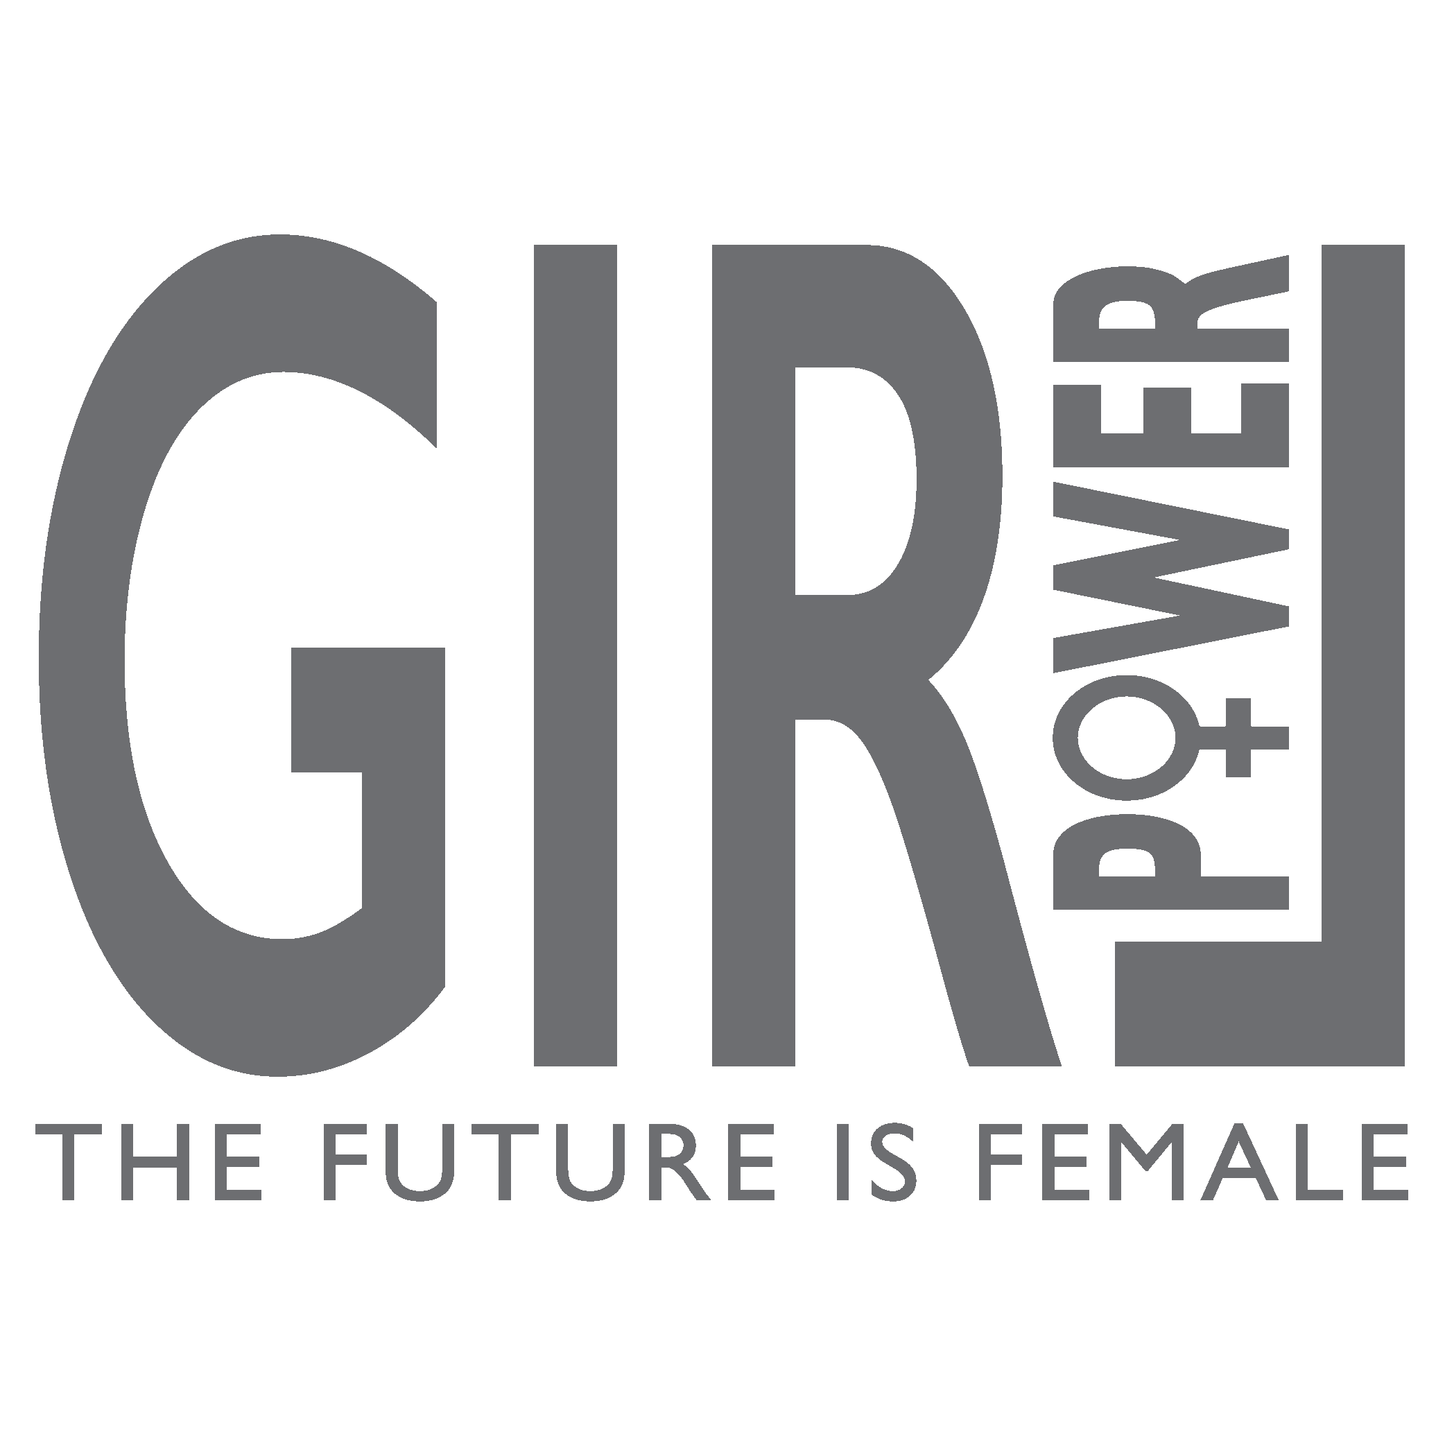 ShopVinylDesignStore.com GIRL Power THE FUTURE IS FEMALE for Corn Hole Boards Wide Style 16 Shop Vinyl Design decals stickers